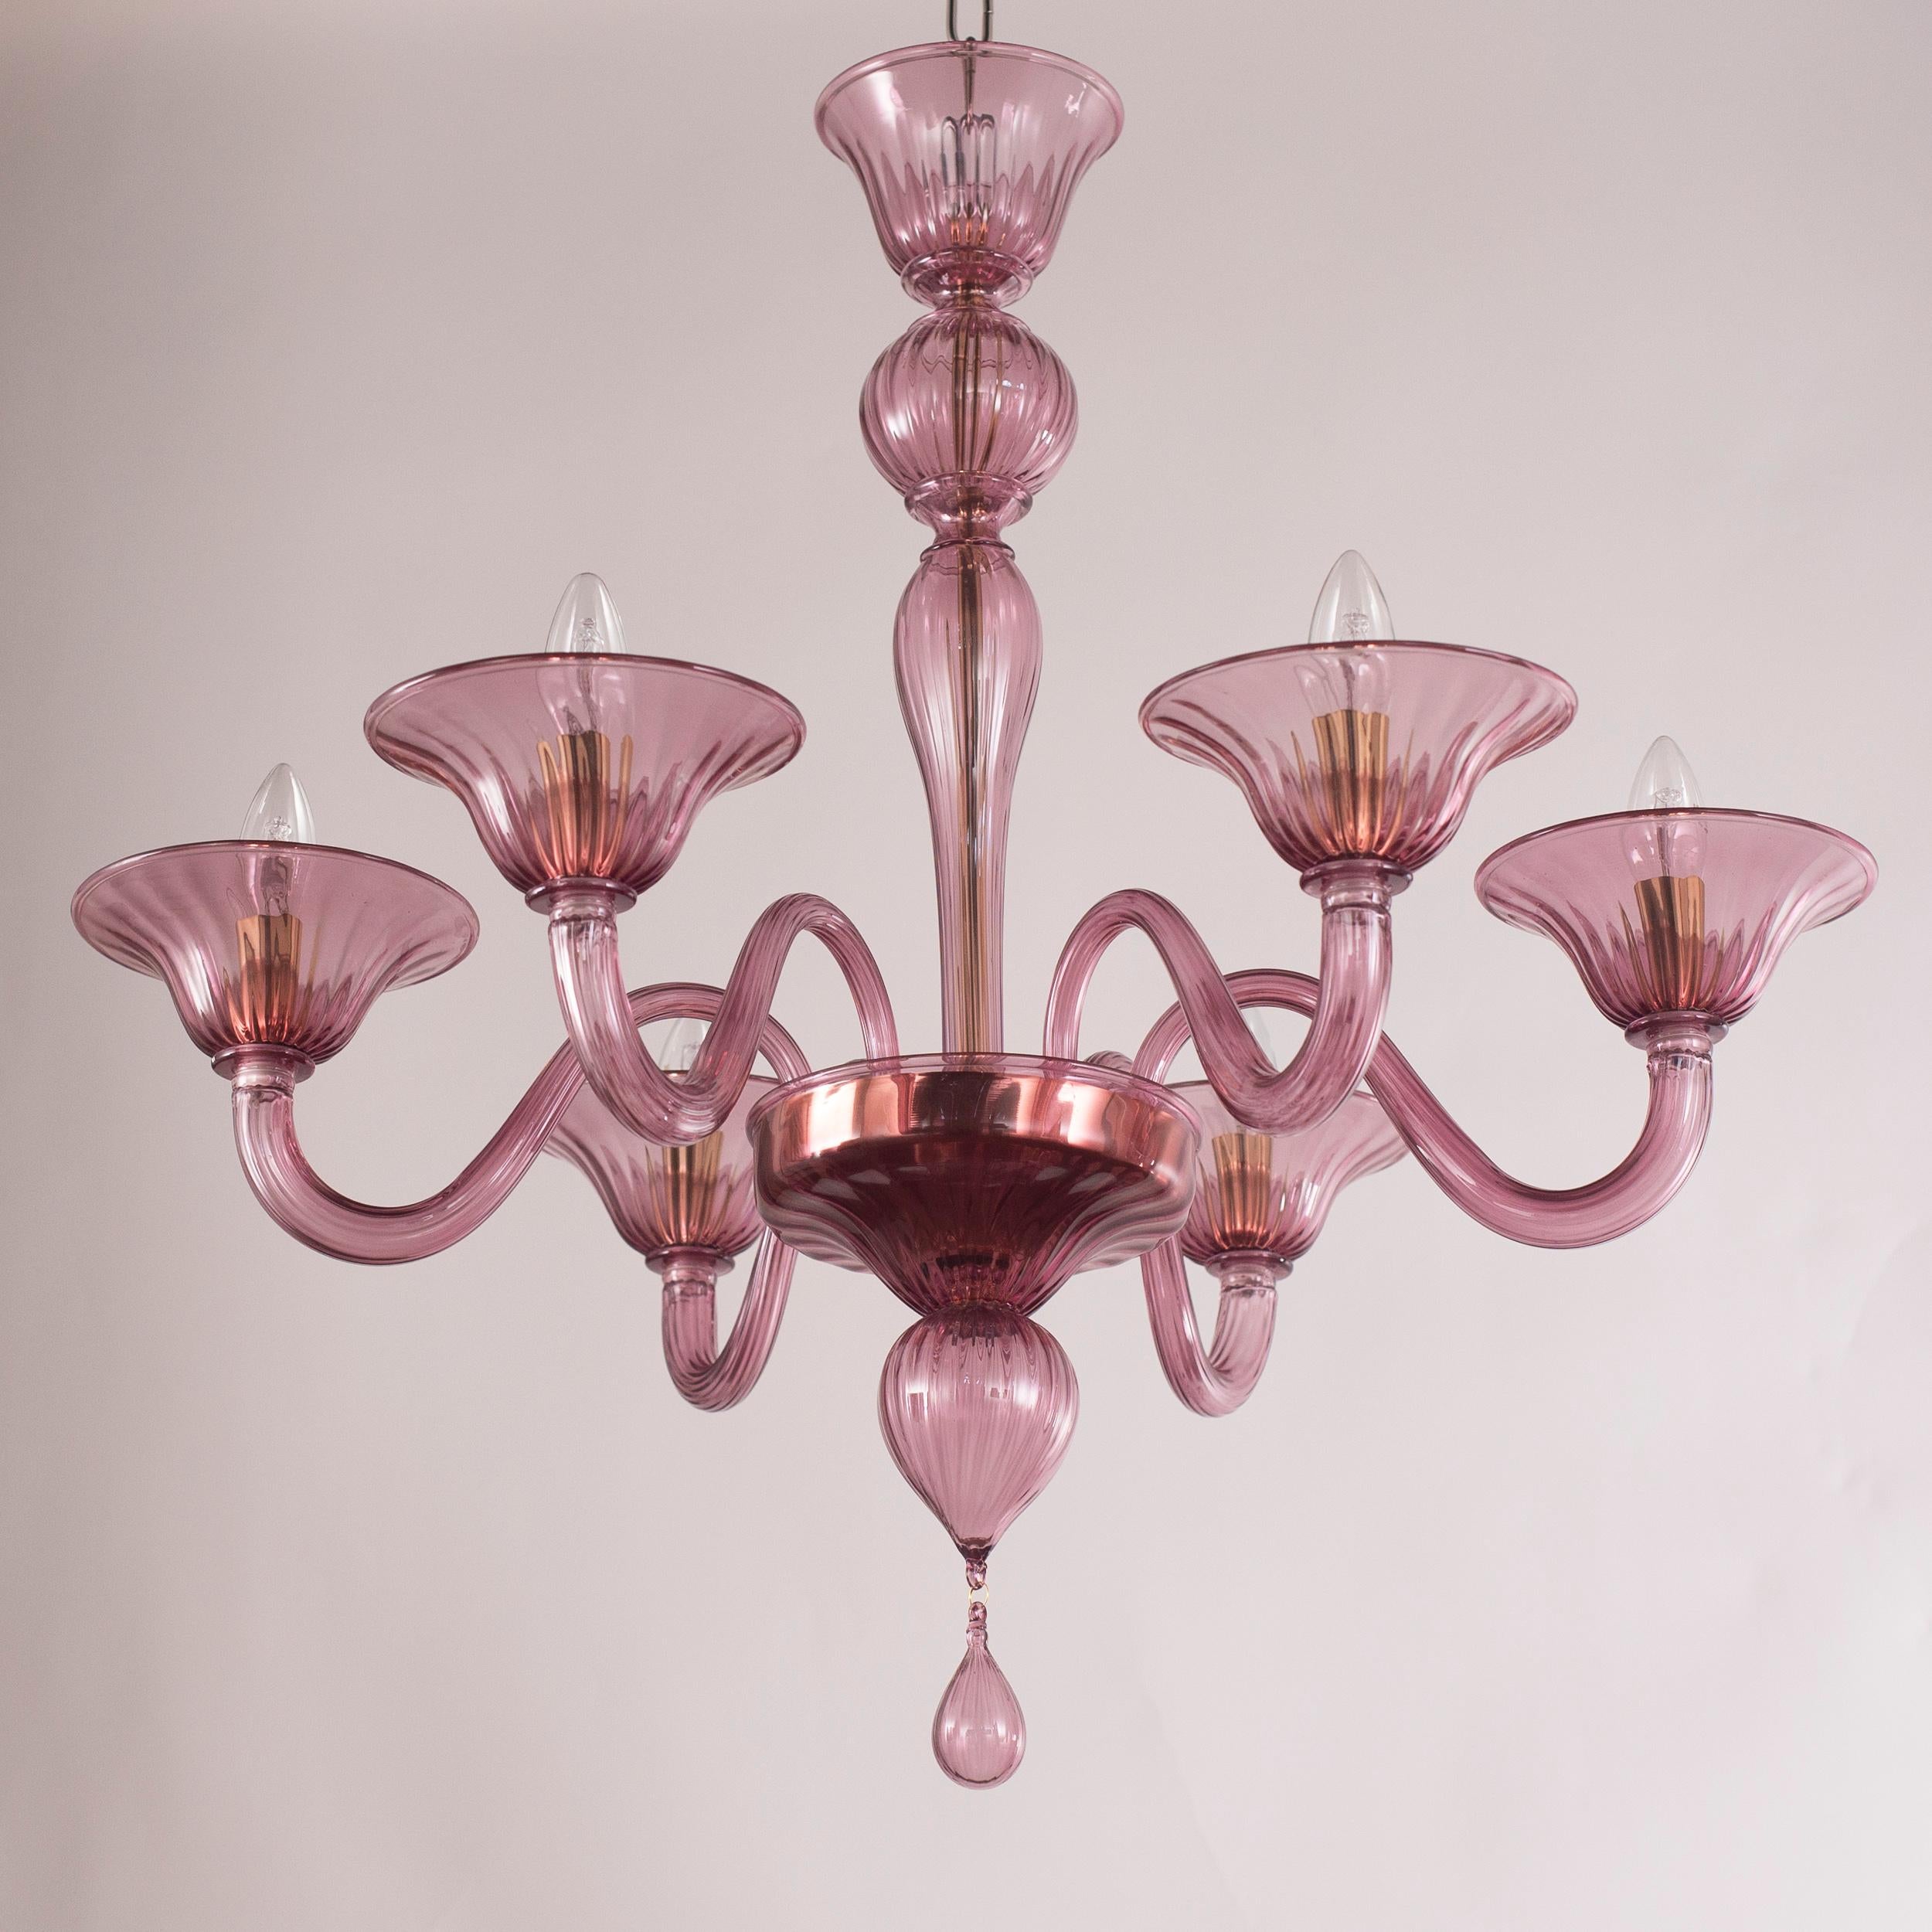 Simplicissimus 360 chandelier, 6 lights, Light Burgundy / Amethyst artistic glass by Multiforme
This collection in Murano glass is characterized by superb simplicity. It is the result of a research which harks back to the Classic Murano chandeliers